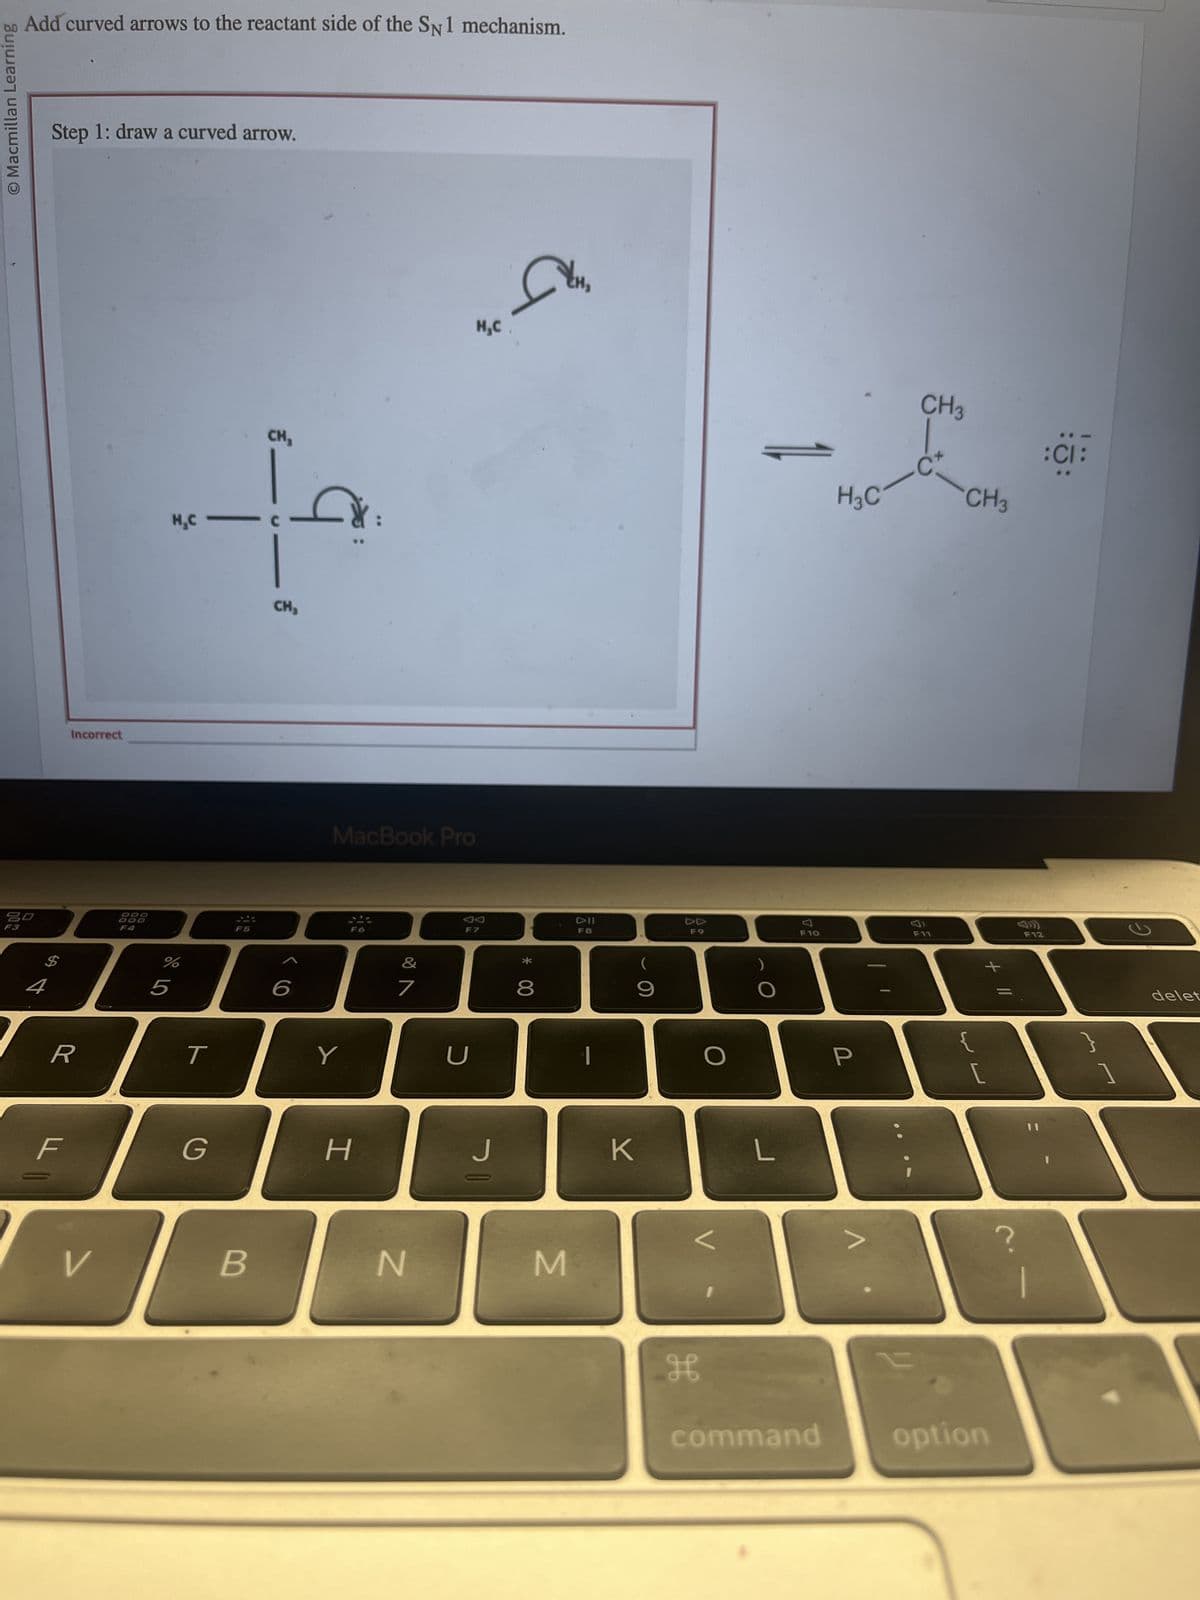 O Macmillan Learning
Add curved arrows to the reactant side of the SN1 mechanism.
20
4
Step 1: draw a curved arrow.
Incorrect
R
F
V
DOO
CH₂
+
H₂C
CH₂
%
5
T
G
F5
B
6
MacBook Pro
Y
H
&
7
N
H₂C
F7
U
San
J
* 00
8
M
DII
F8
(
9
K
F9
H
O
L
F10
command
H3C
P
CH 3
-C
F11
CH3
{
[
option
?
F12
:CI:
1
2
delet